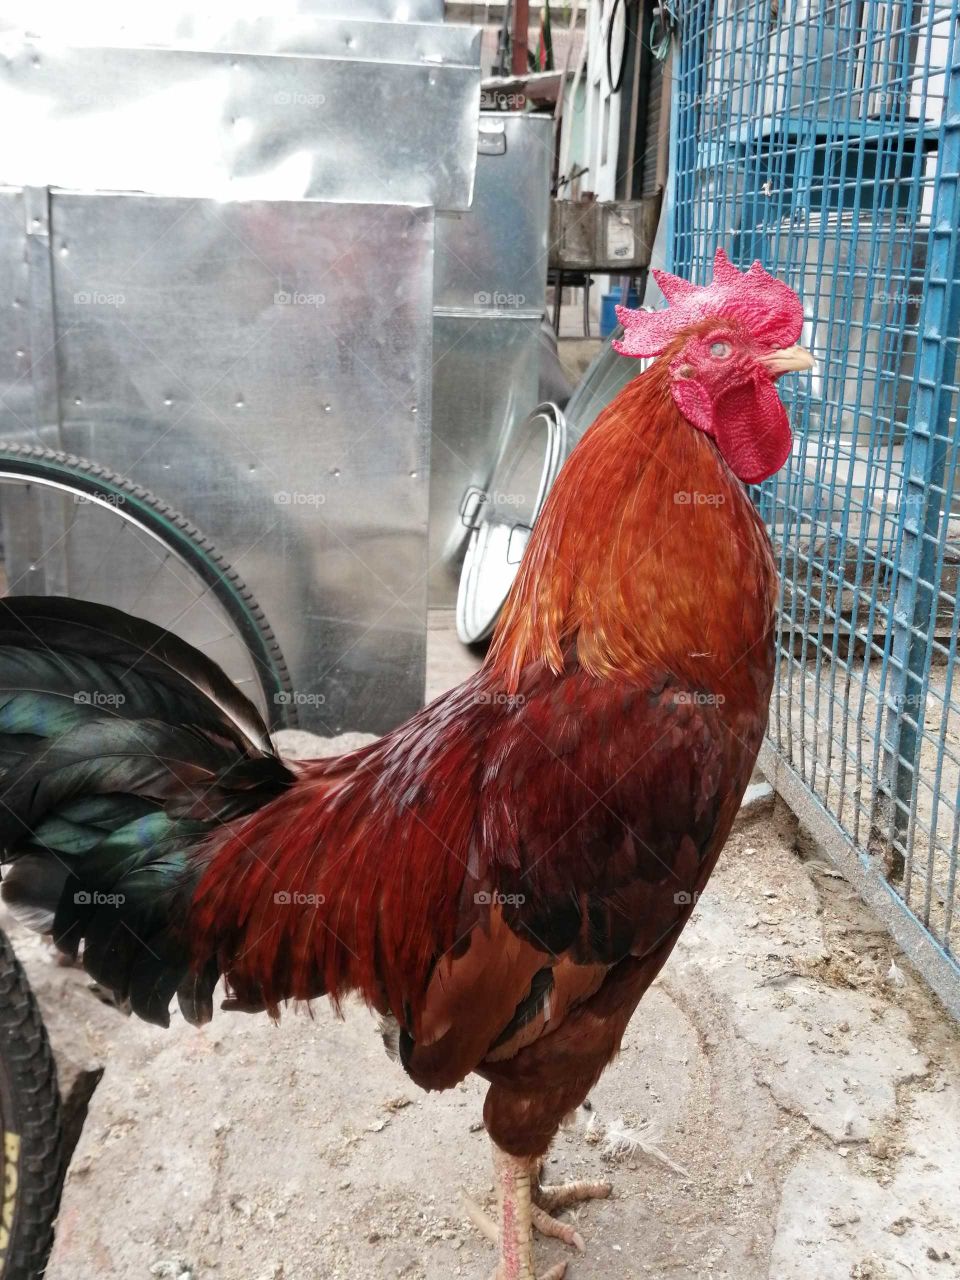 The Indian Red chicken